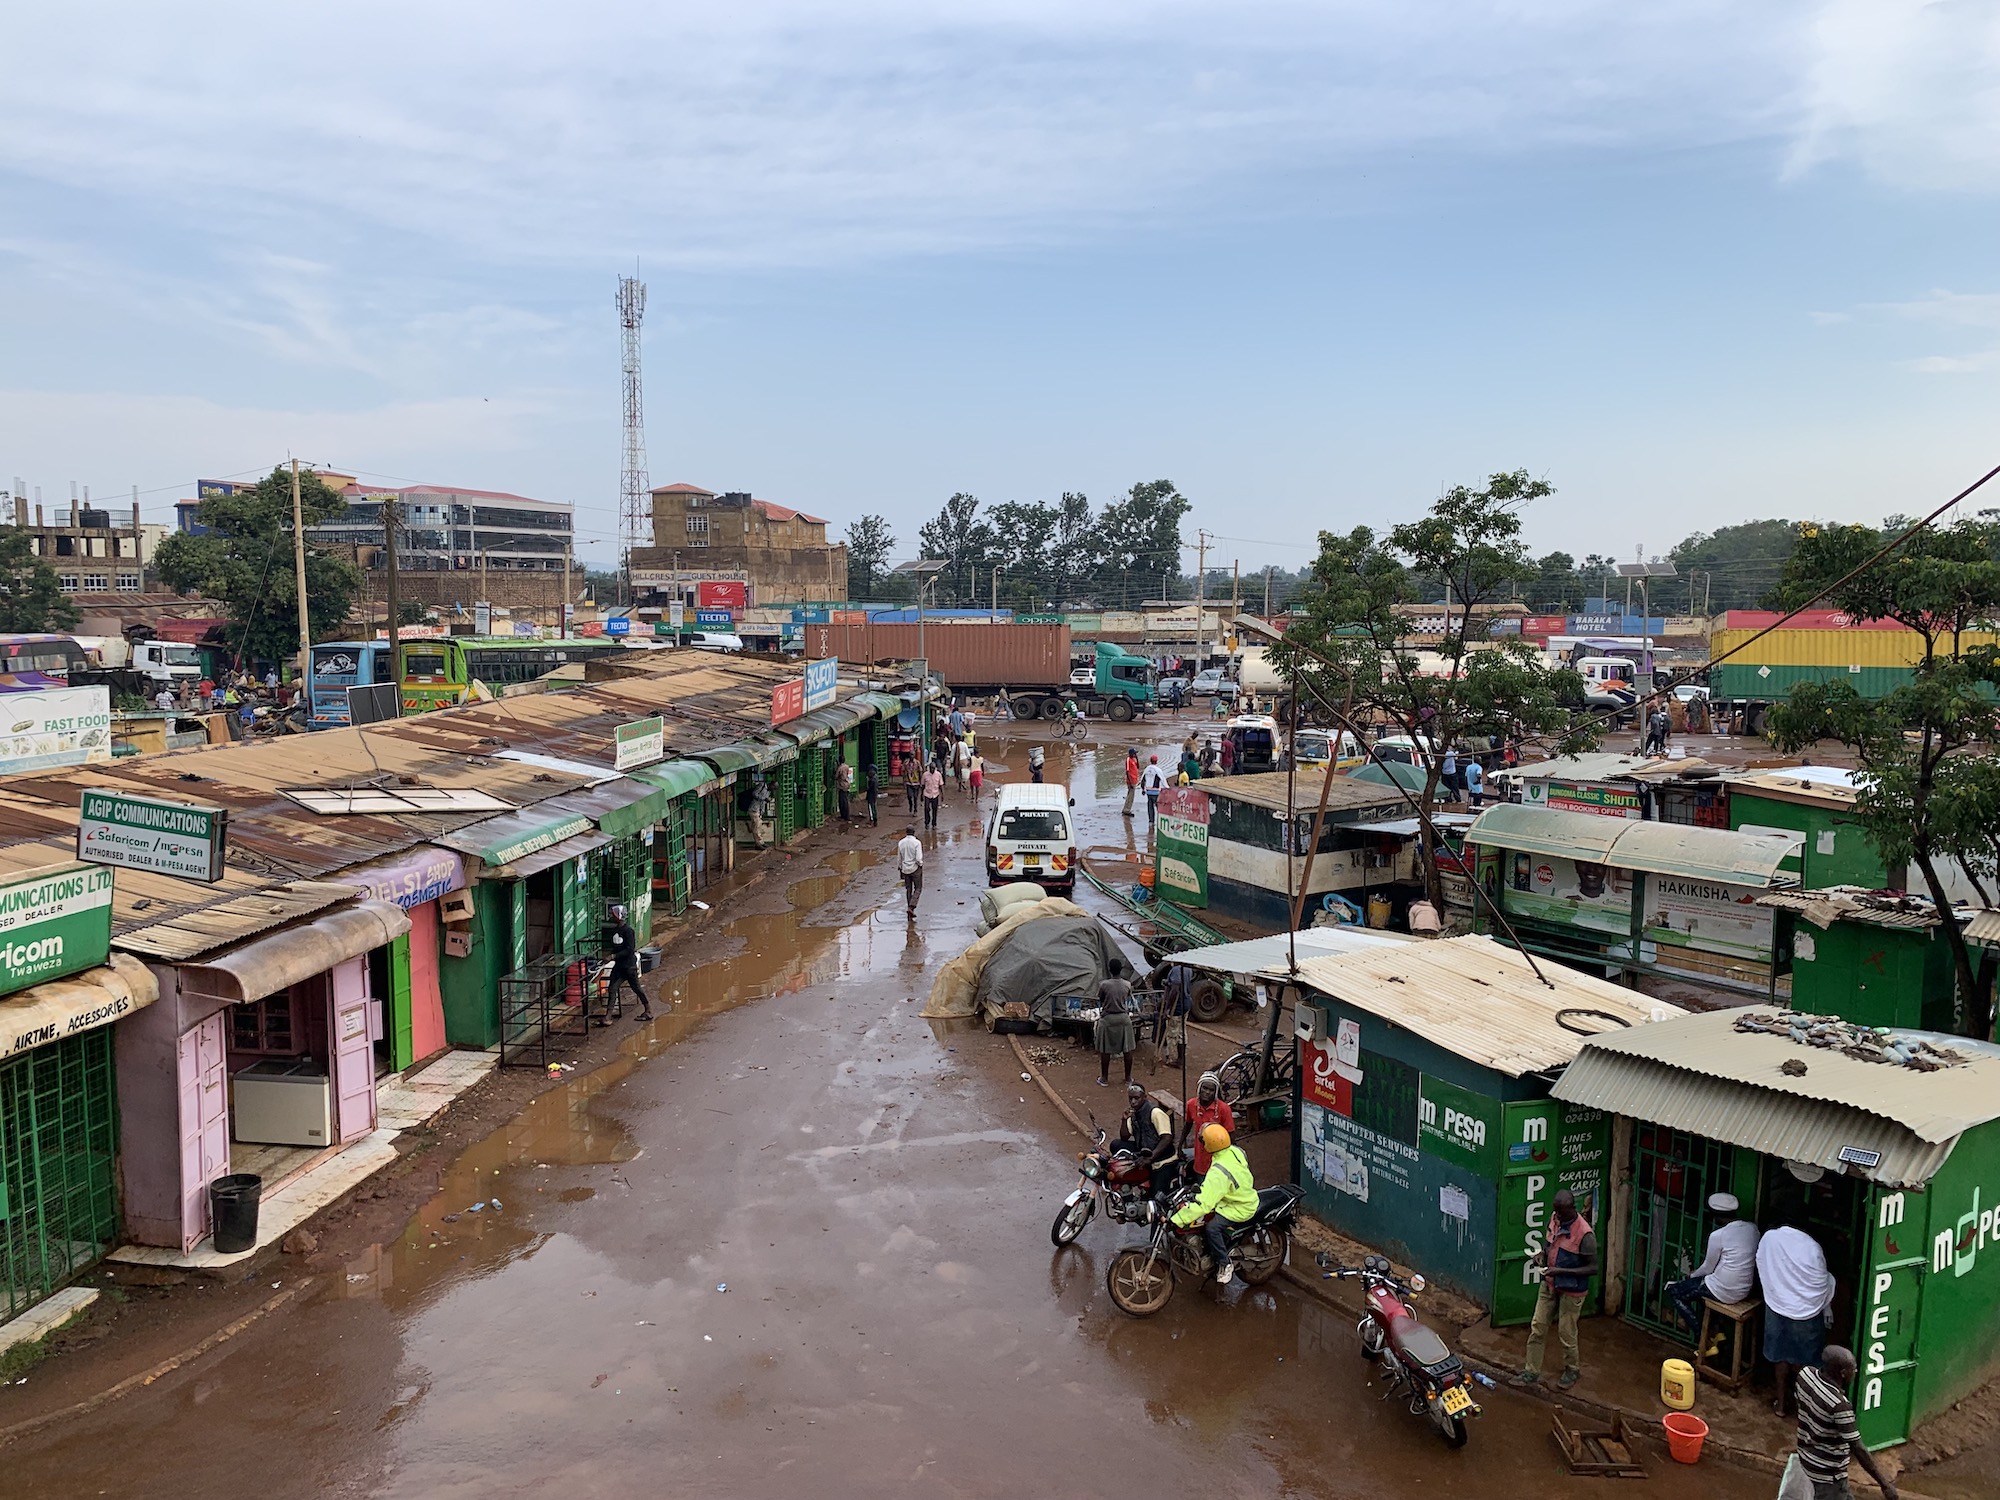 Downtown Busia after a rainy day.